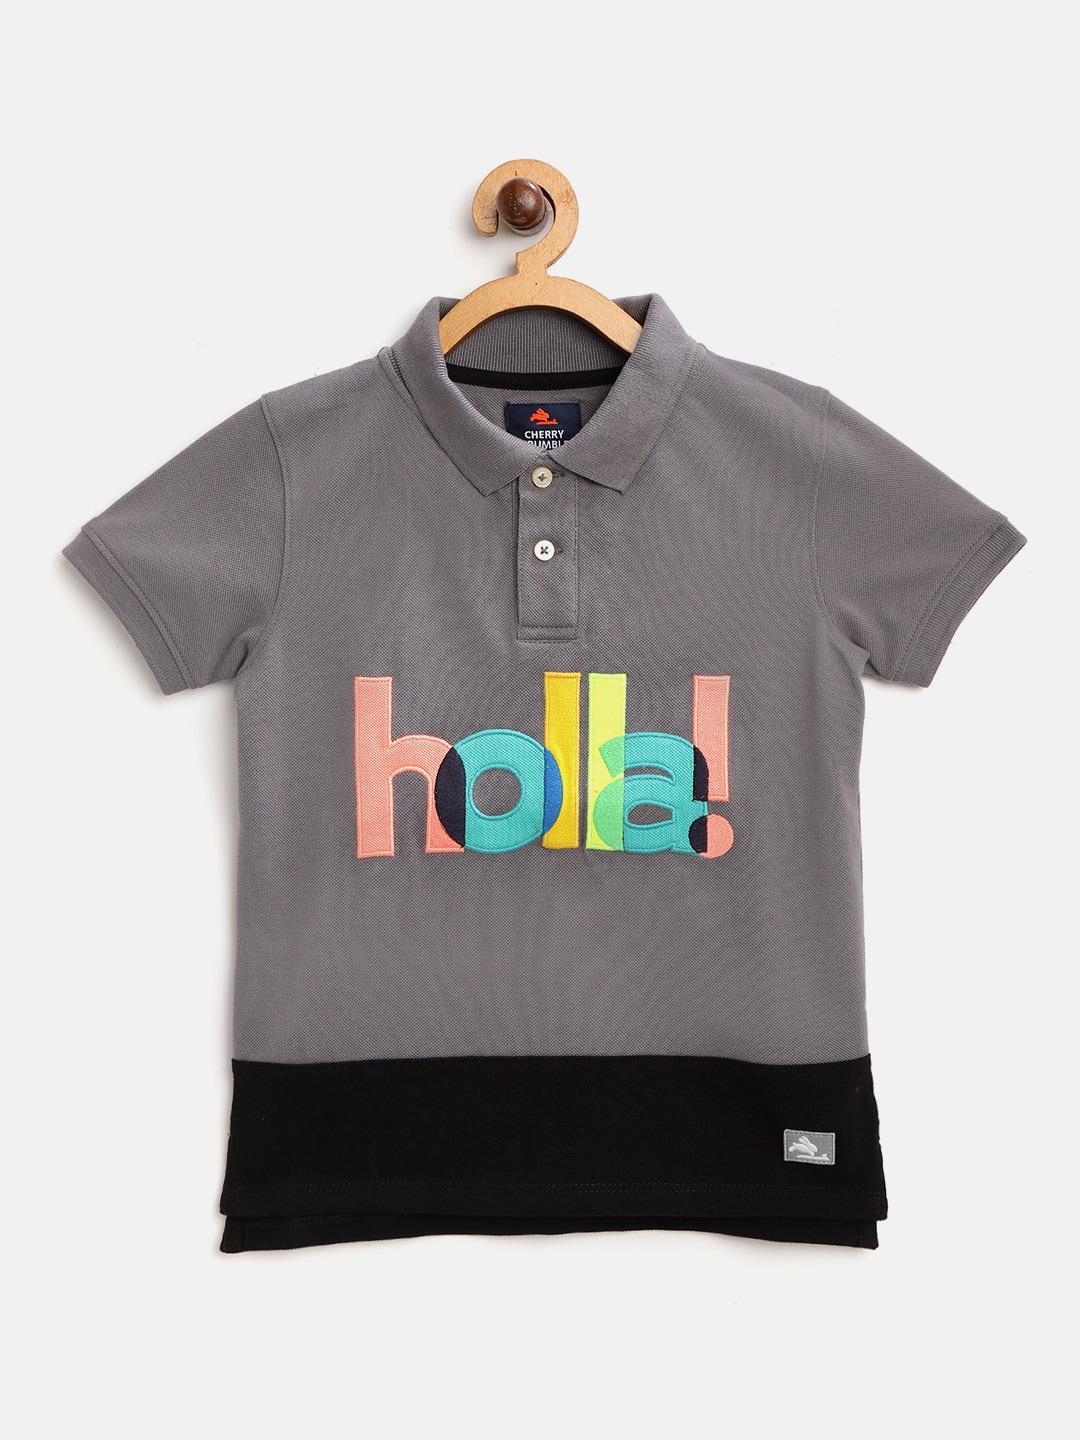 Cherry Crumble Boys Charcoal Grey & Black Holla Patterned Polo Collar T-shirt